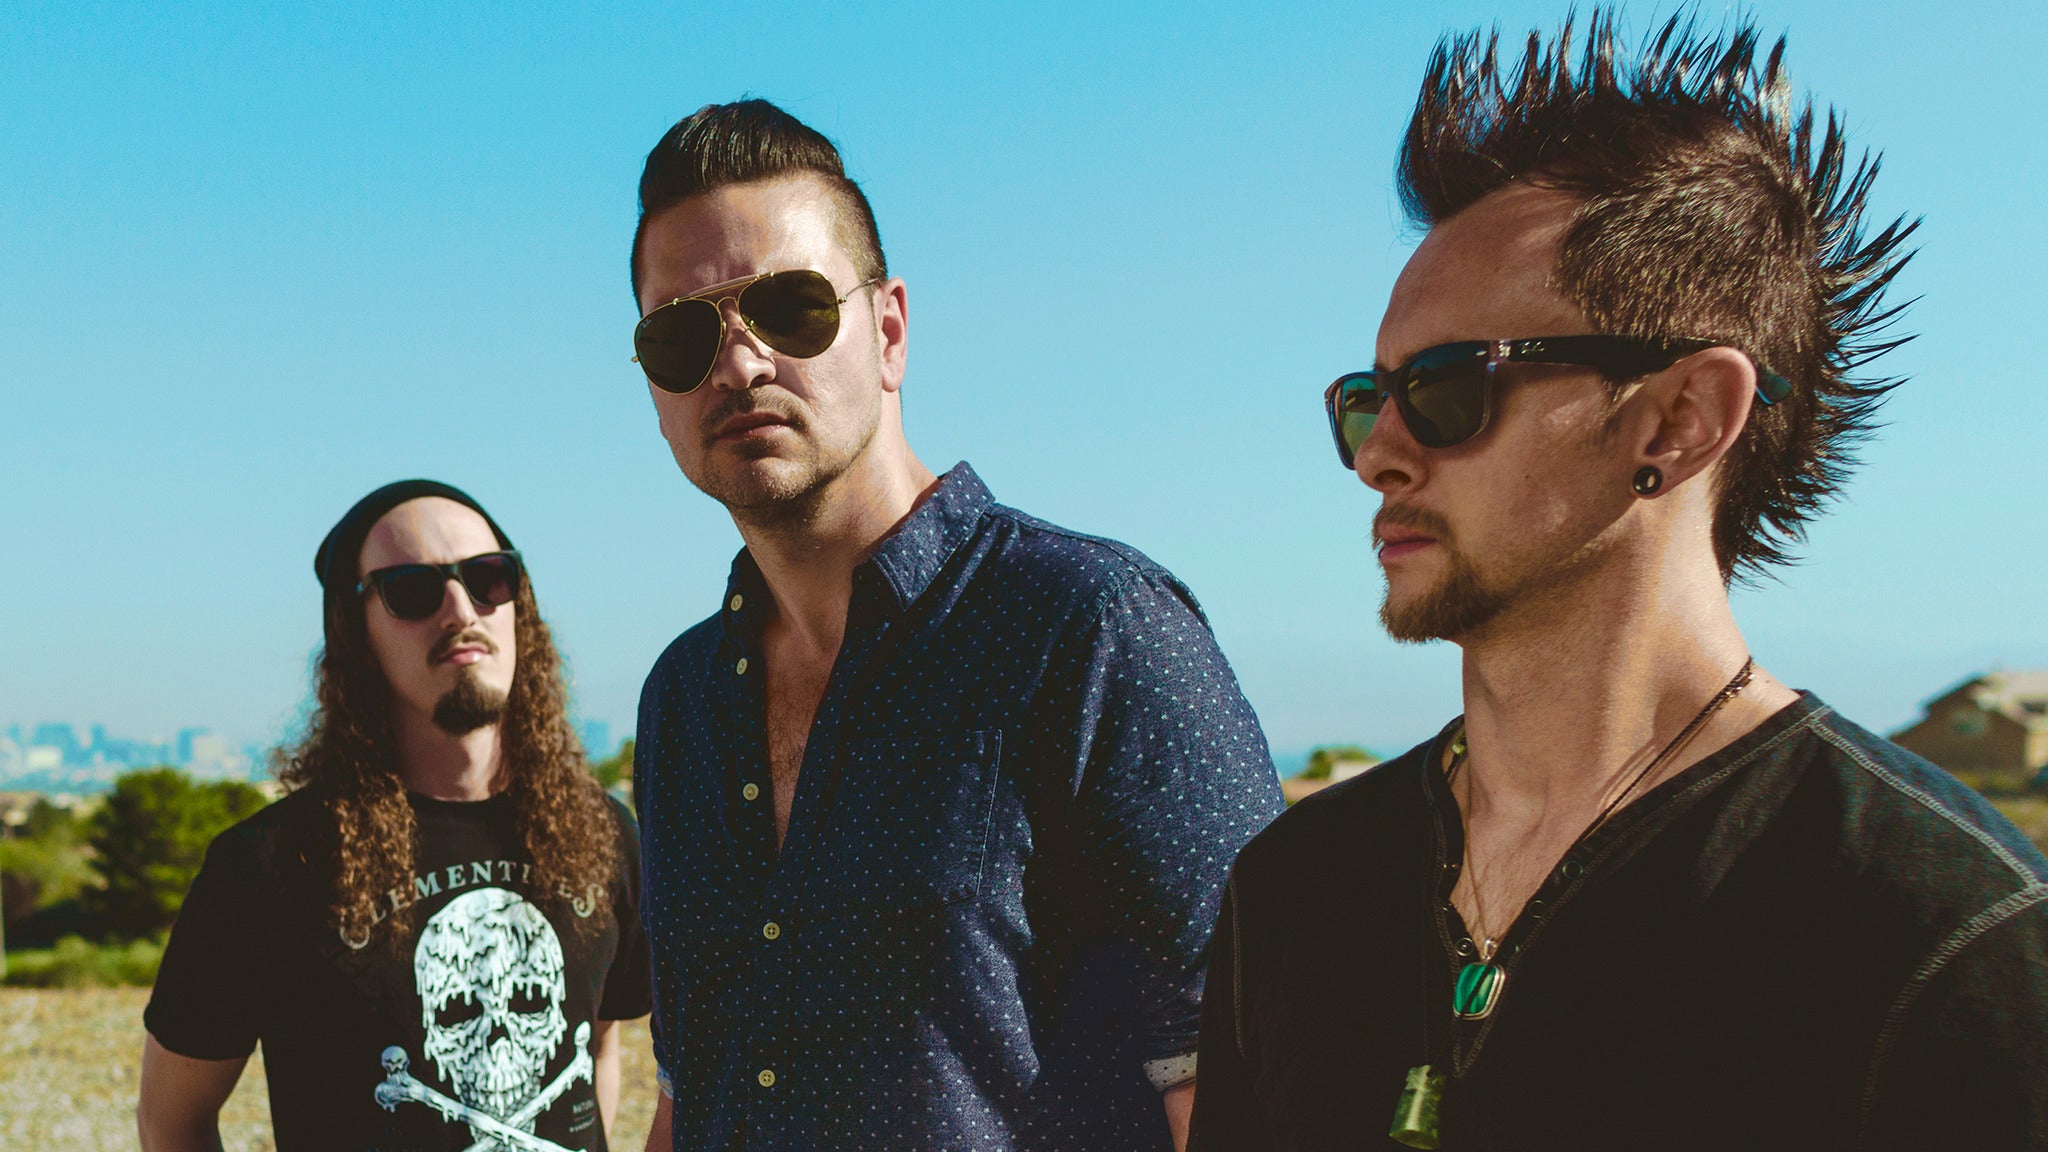 Image used with permission from Ticketmaster | Adelitas Way tickets